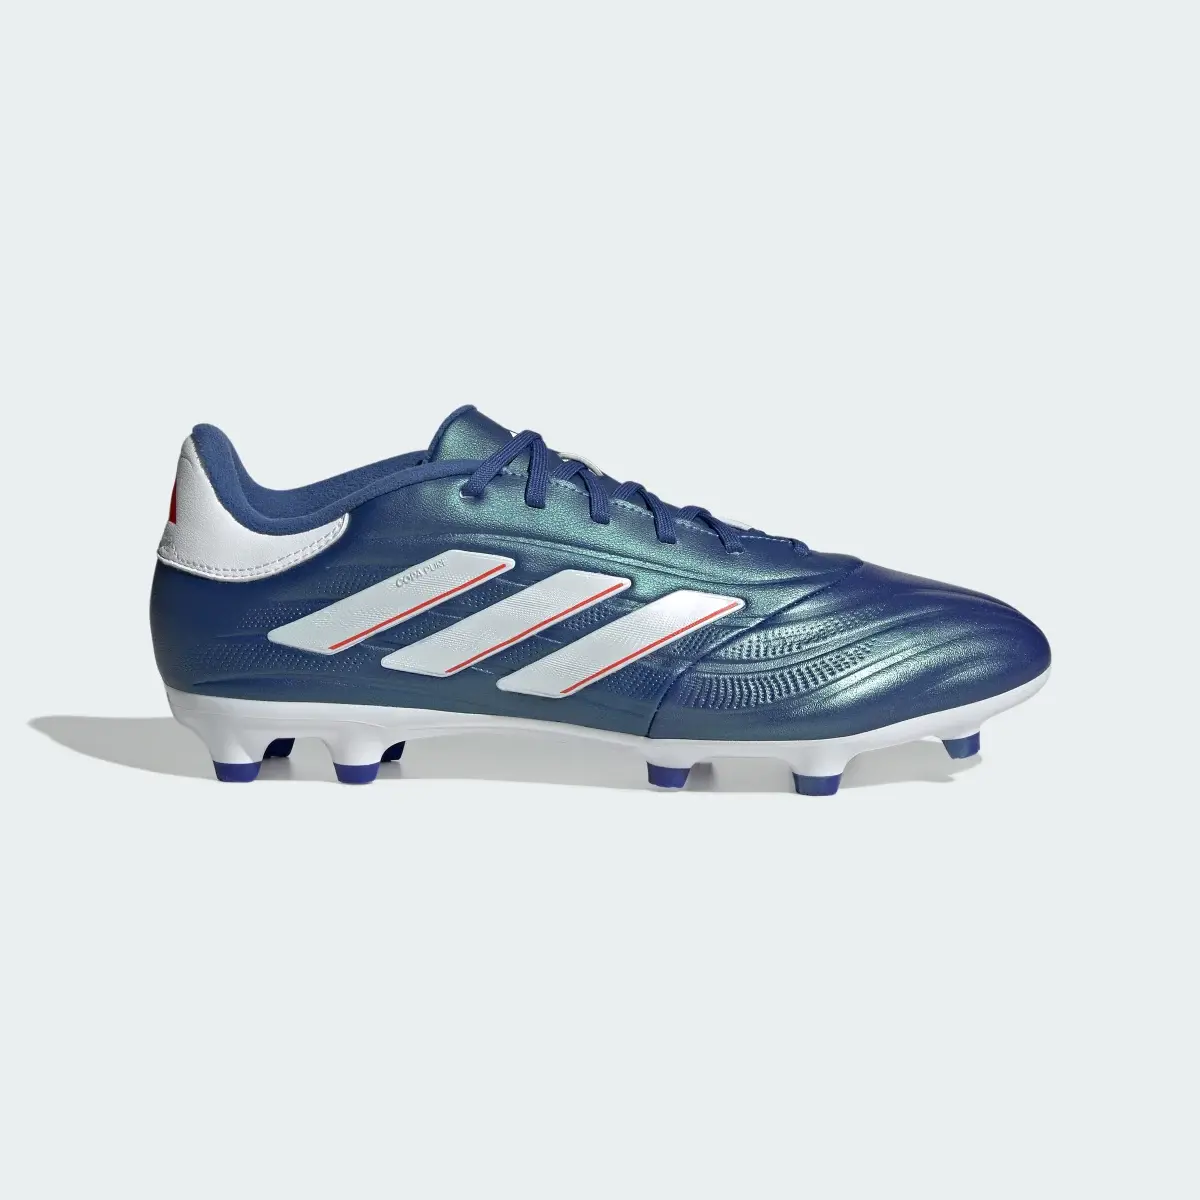 Adidas Copa Pure II.3 Firm Ground Boots. 2